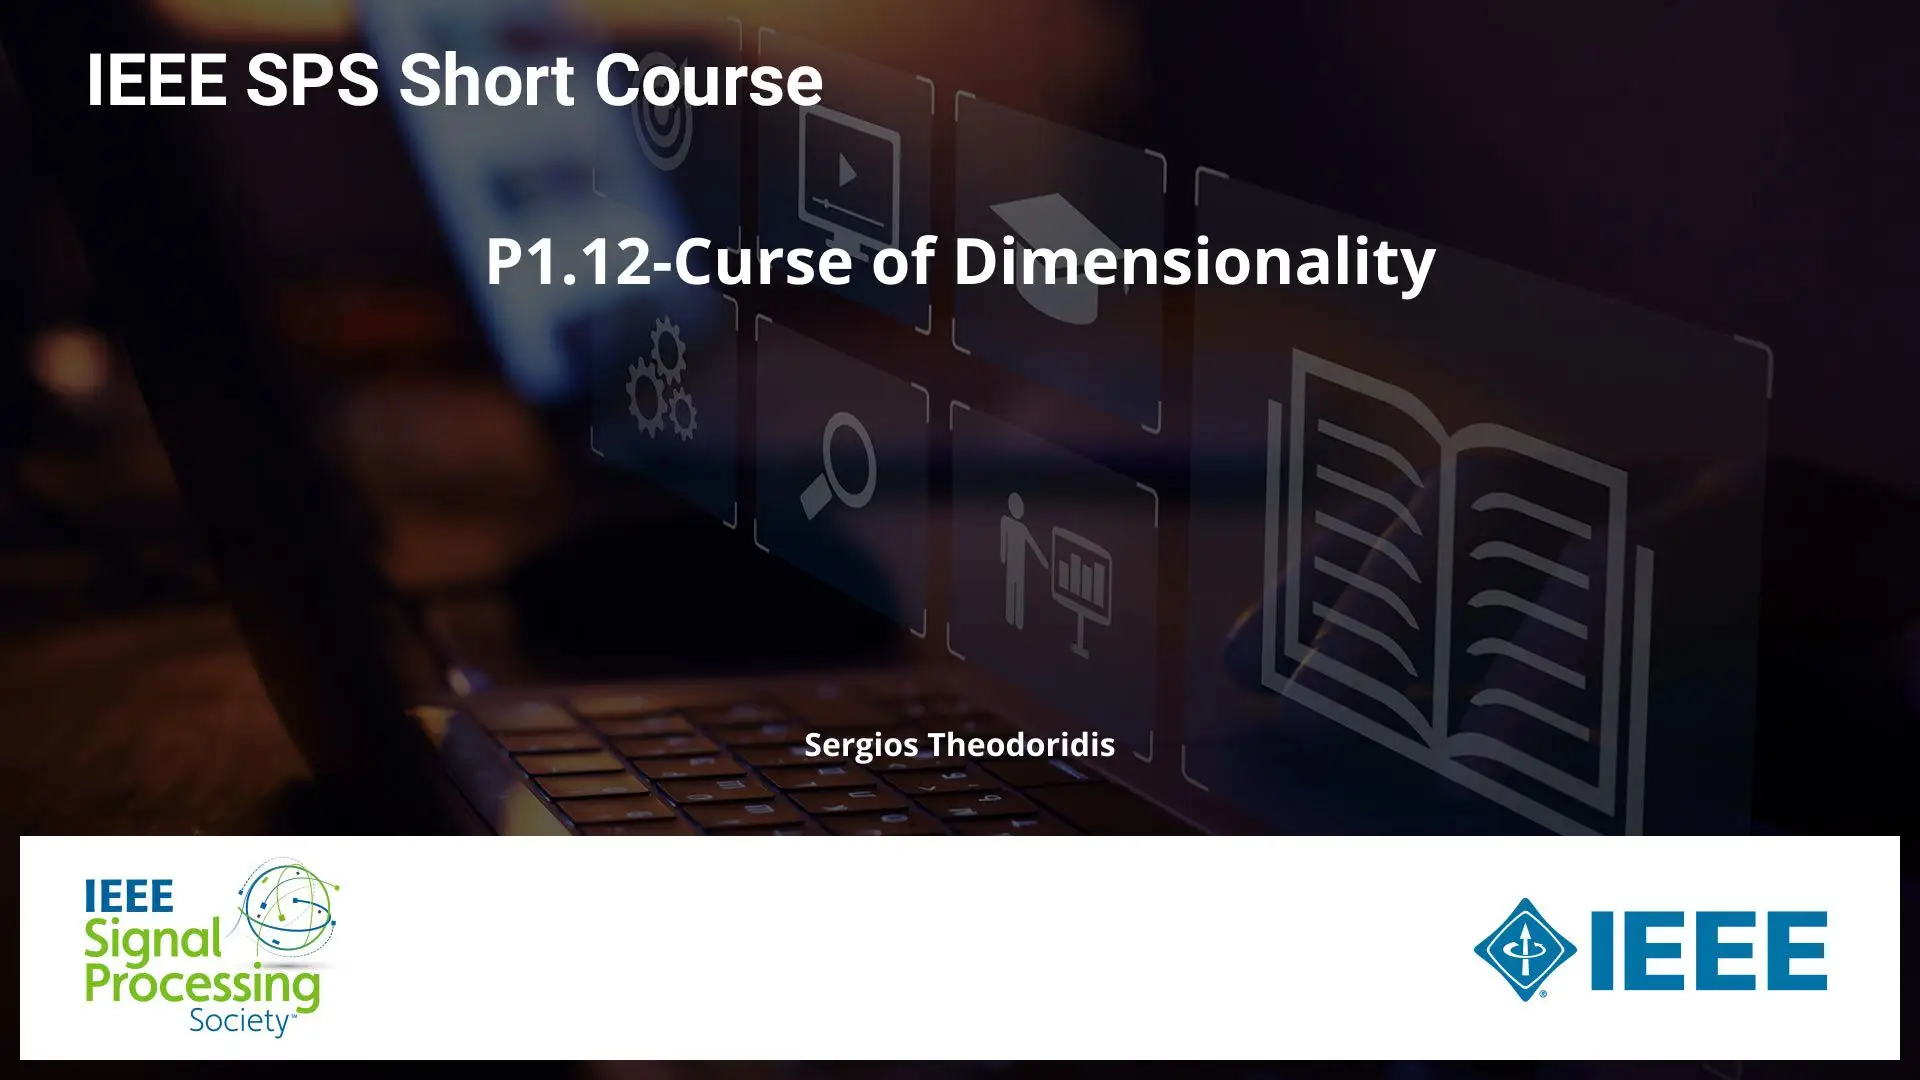 P1.12-Curse of Dimensionality